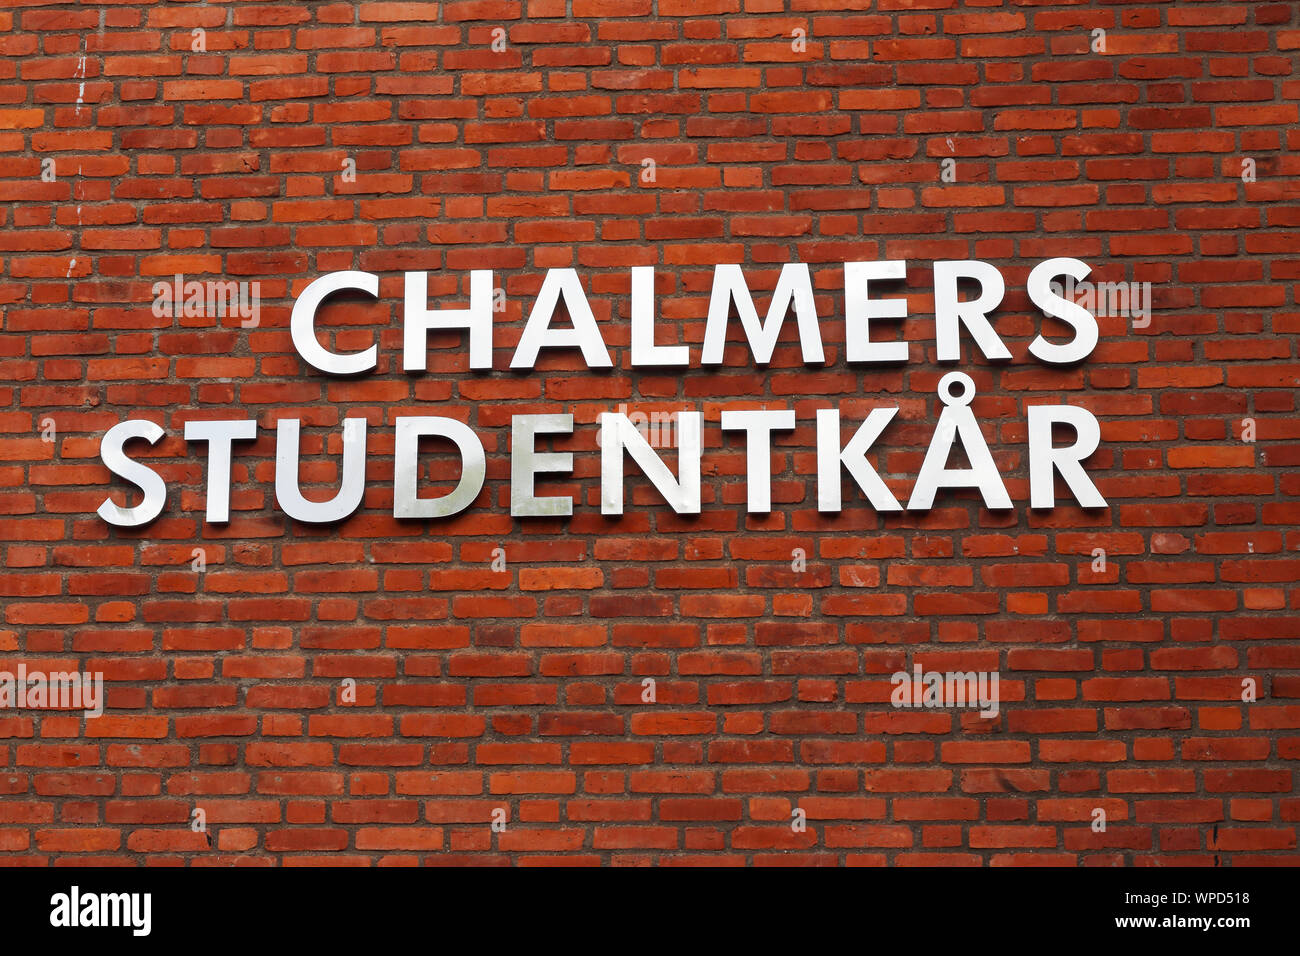 Gothenburg, Sweden - September 2, 2019: The Chalmers student union sign at the Chalmers university of technology. Stock Photo